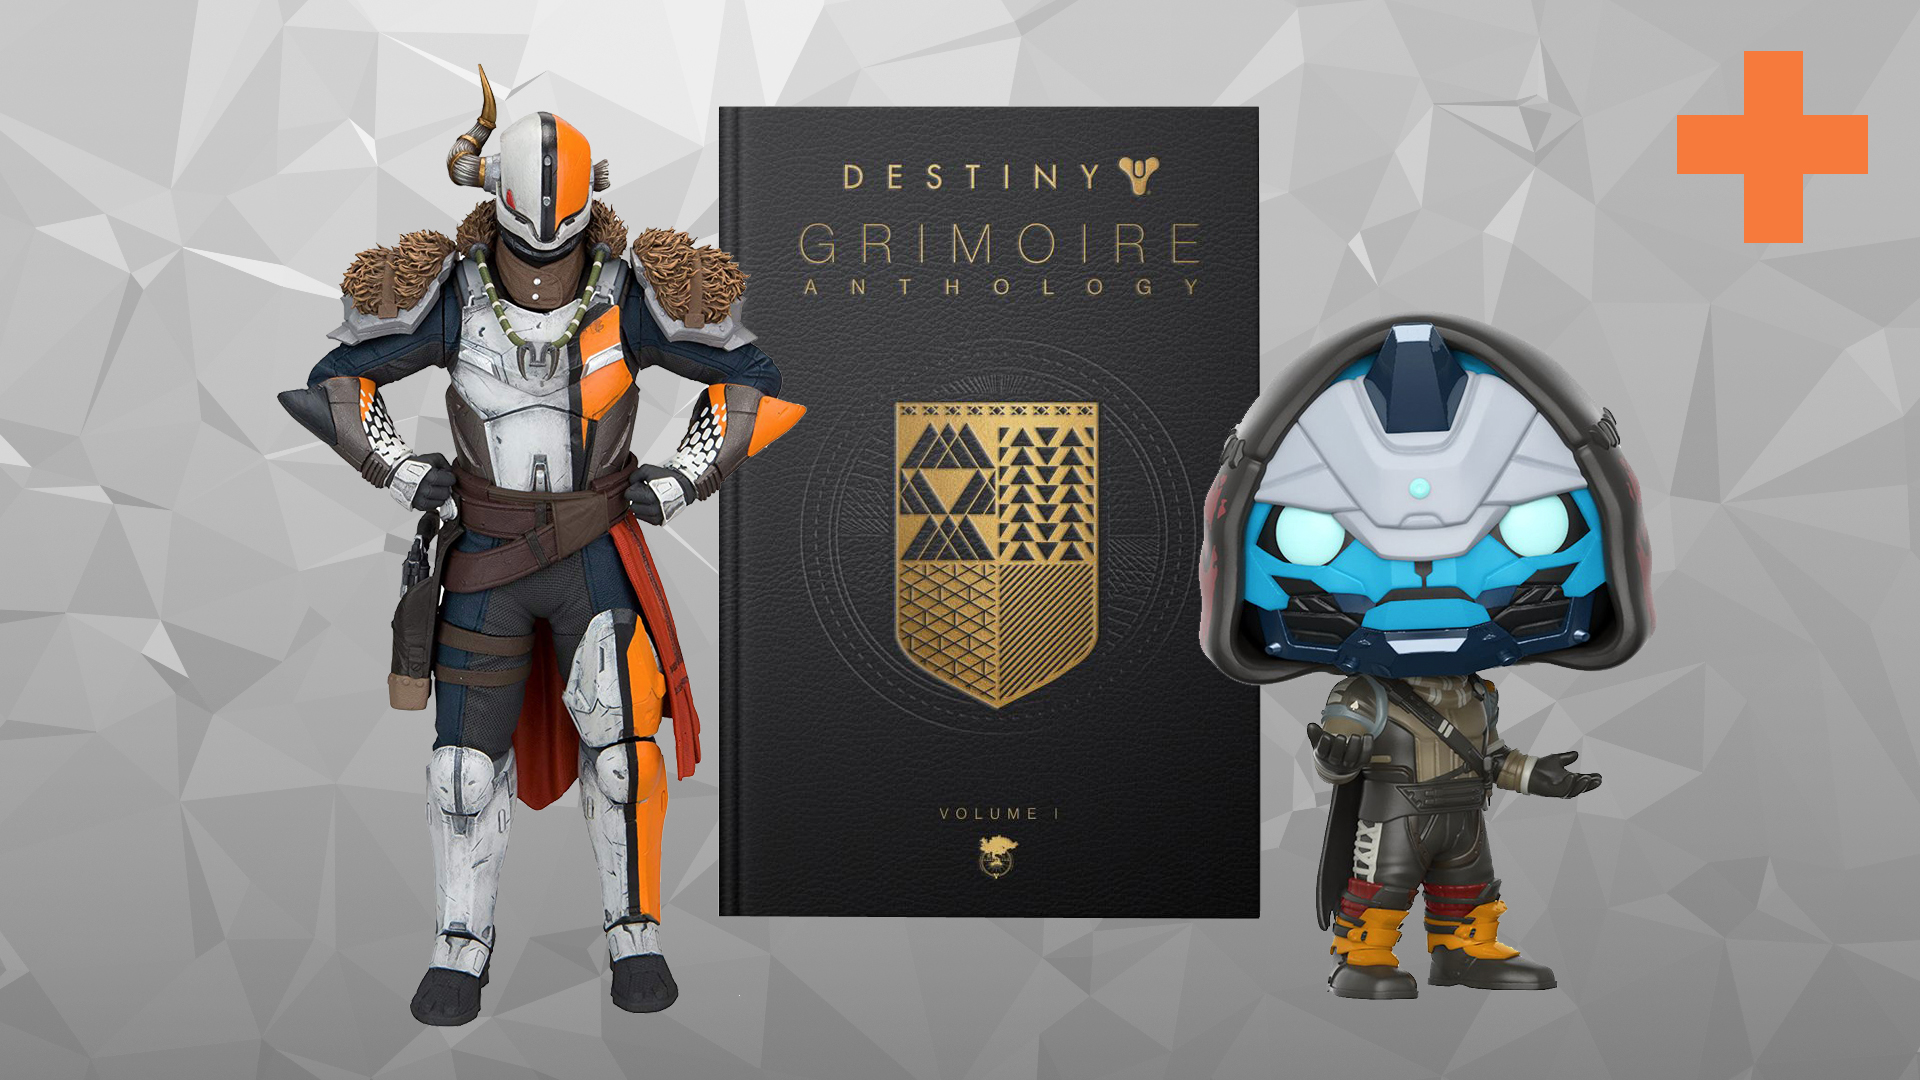 The best Destiny merchandise that proves real life loot can be Legendary